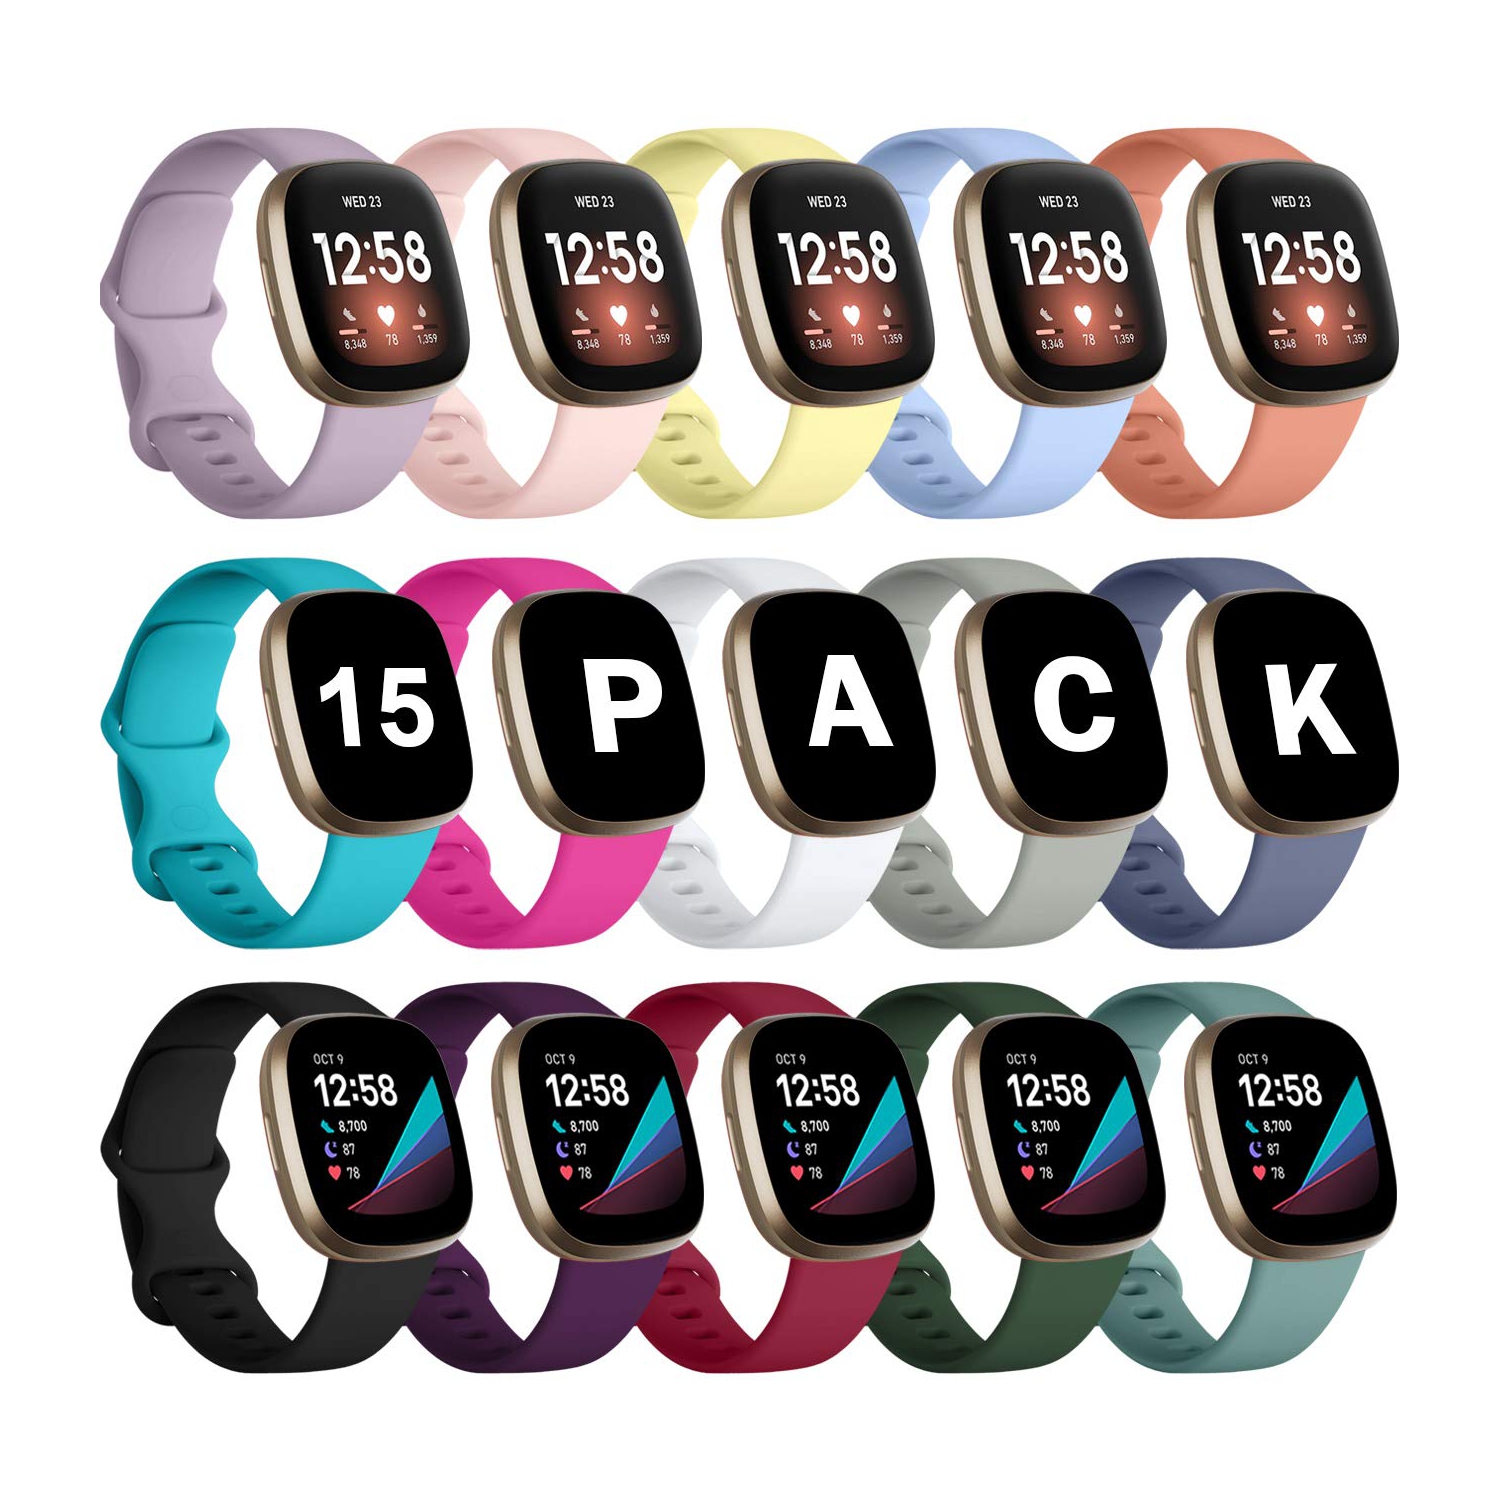 Fitbit Versa 3/Versa 4 Bands for Women Men, 15 Pack Sport Band for Fitbit Sense/Sense 2 Bands for Women Men, Classic Soft Flexible Replacement Strap for Fitbit Versa 3 Bands Small